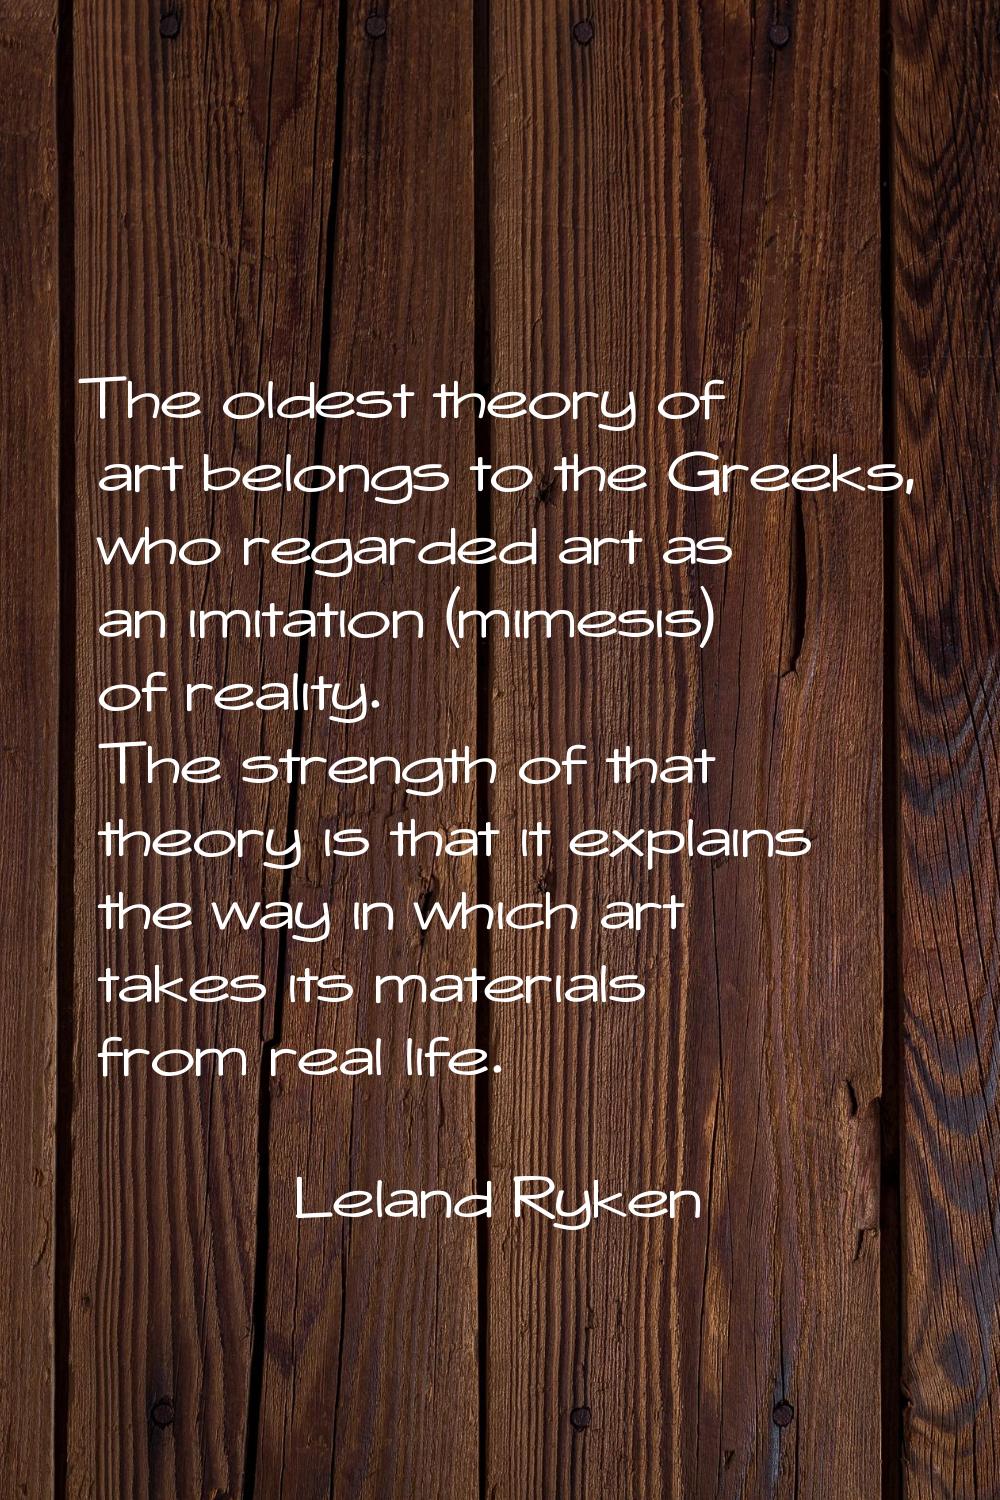 The oldest theory of art belongs to the Greeks, who regarded art as an imitation (mimesis) of reali